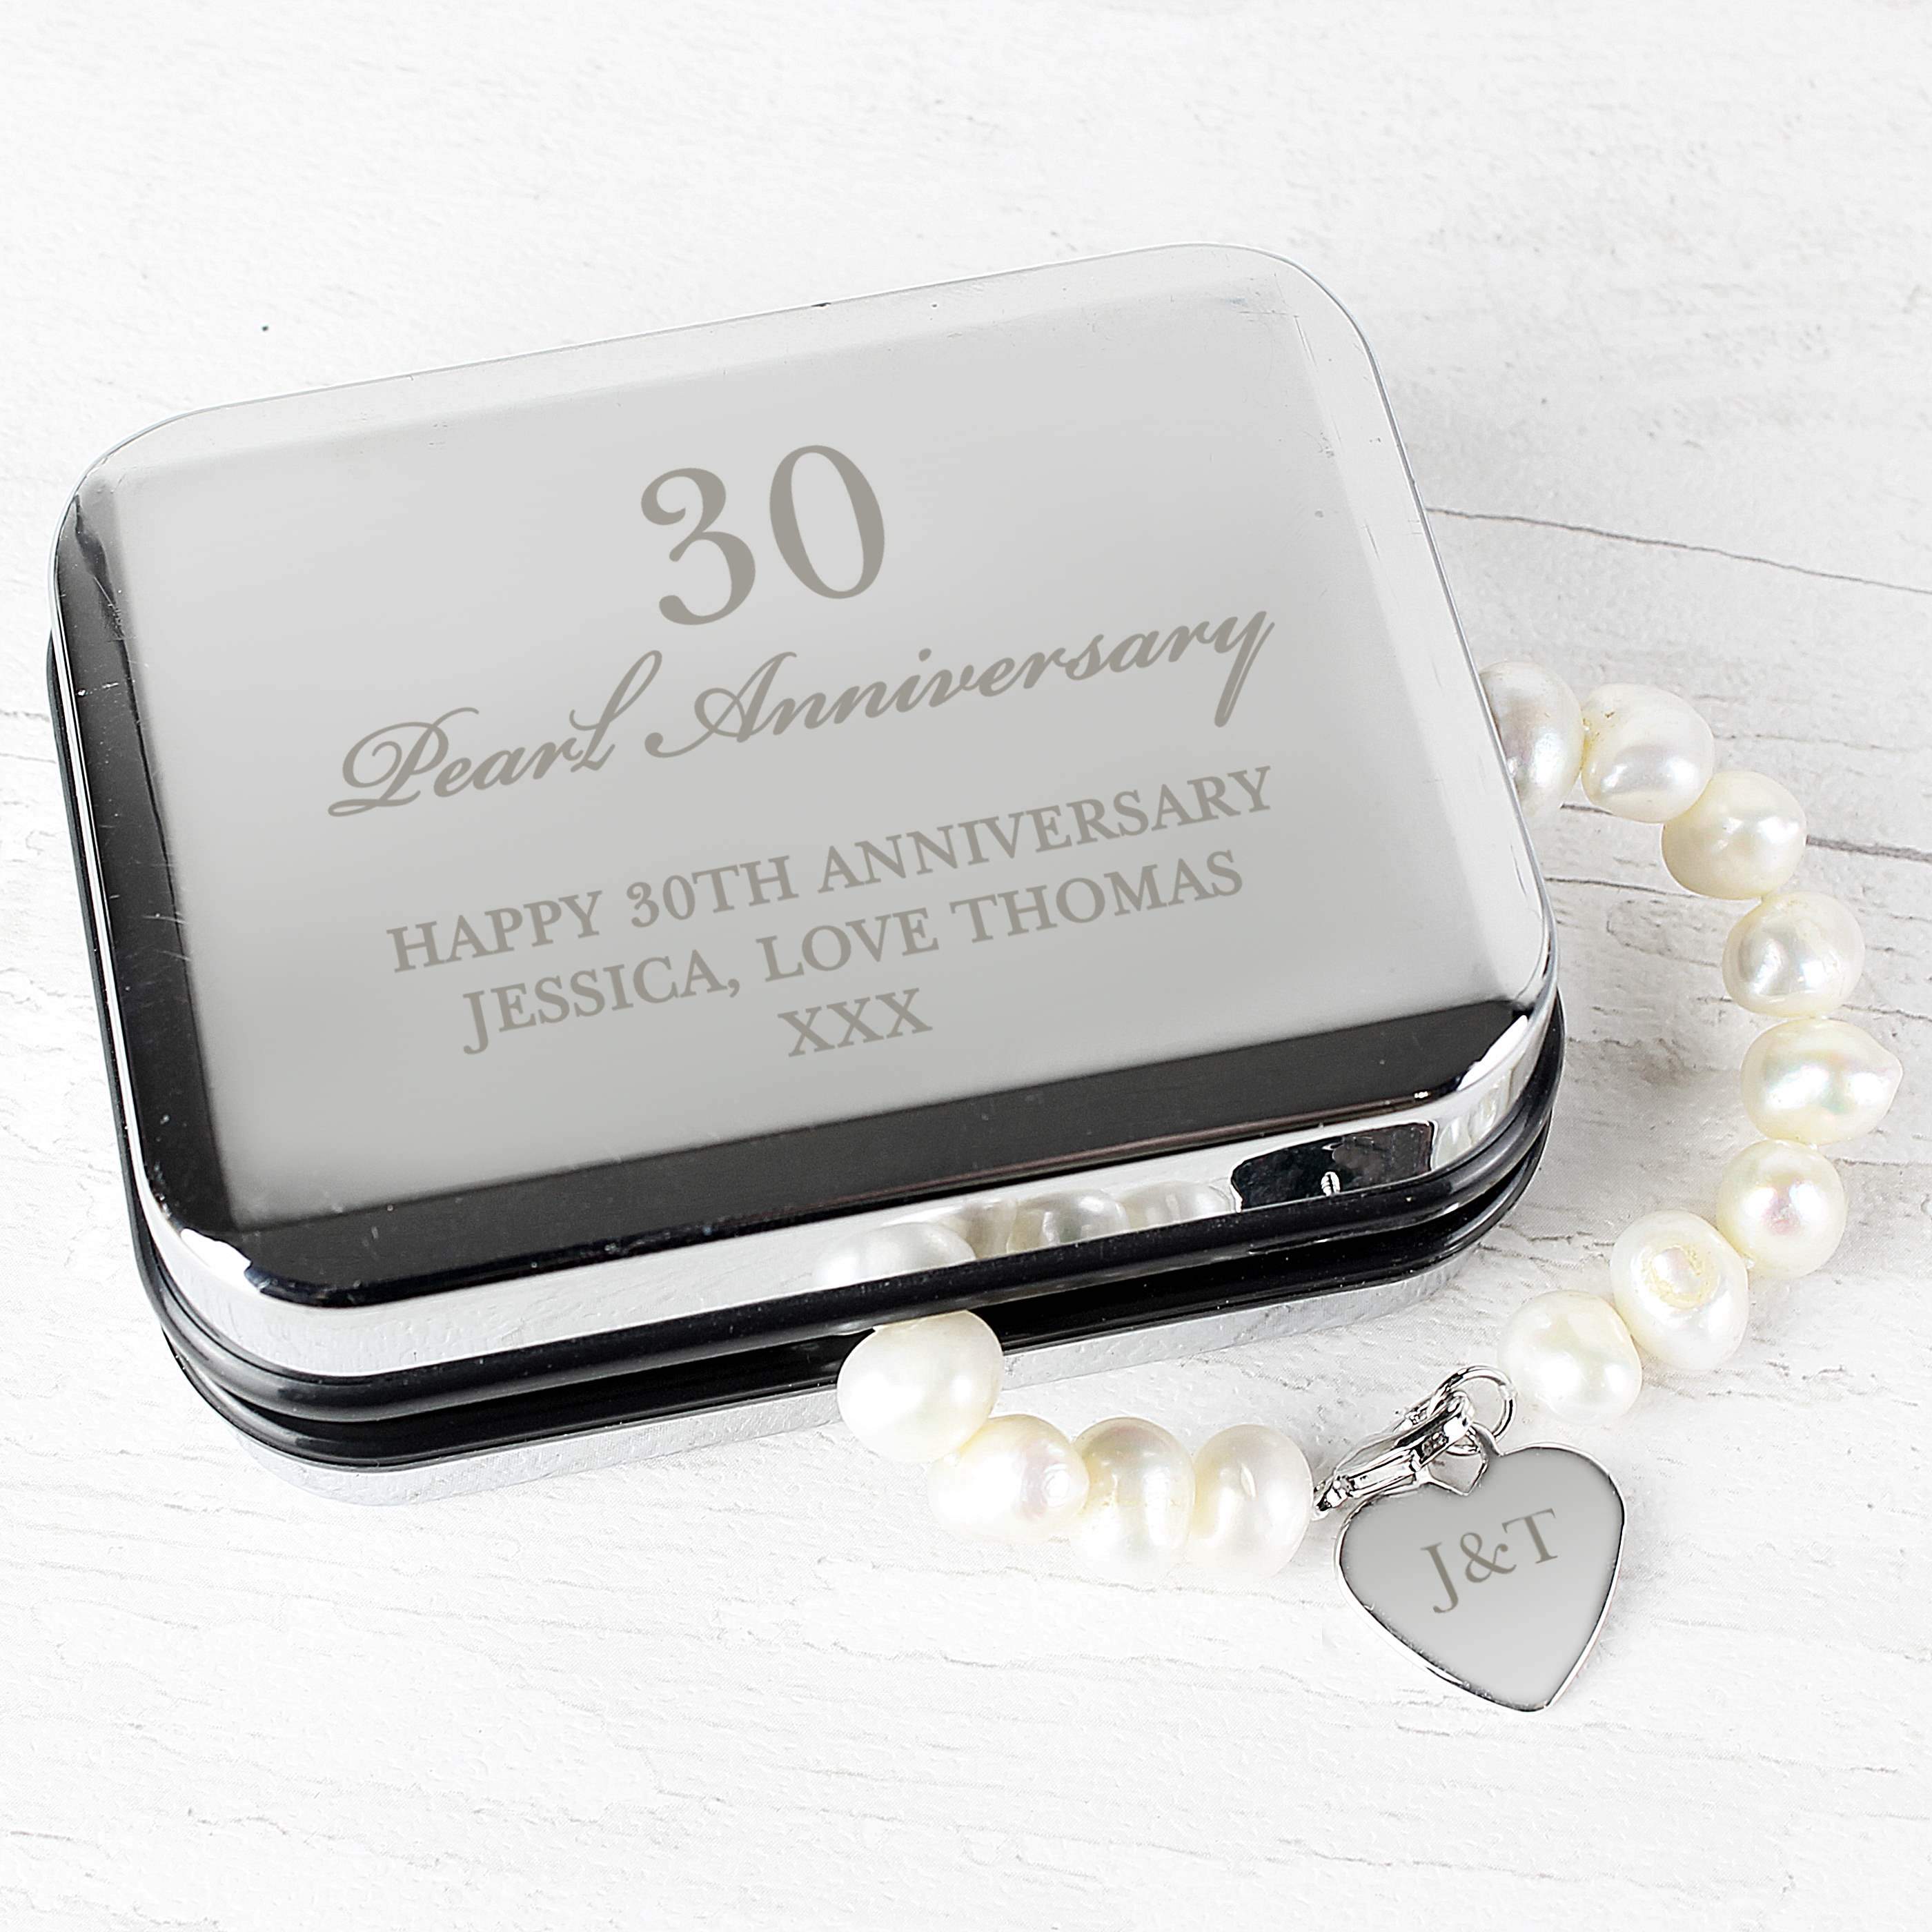 Best Pearl Anniversary Gifts - Ideas For Your 30 Years Together